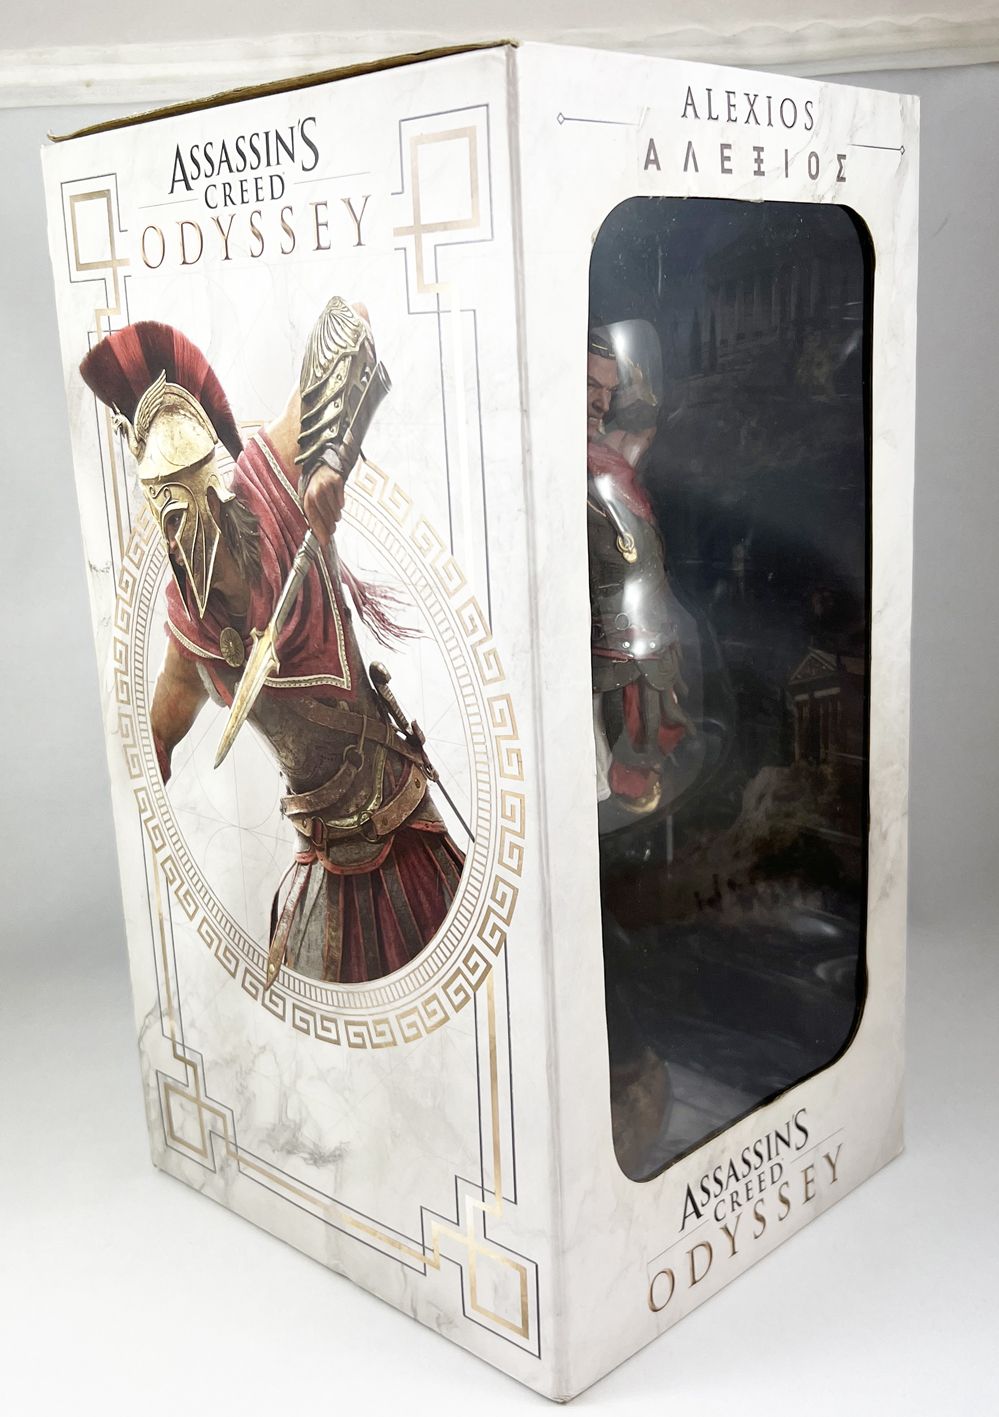 Assassin's Creed Odyssey - Alexios - 12.5inch Statue